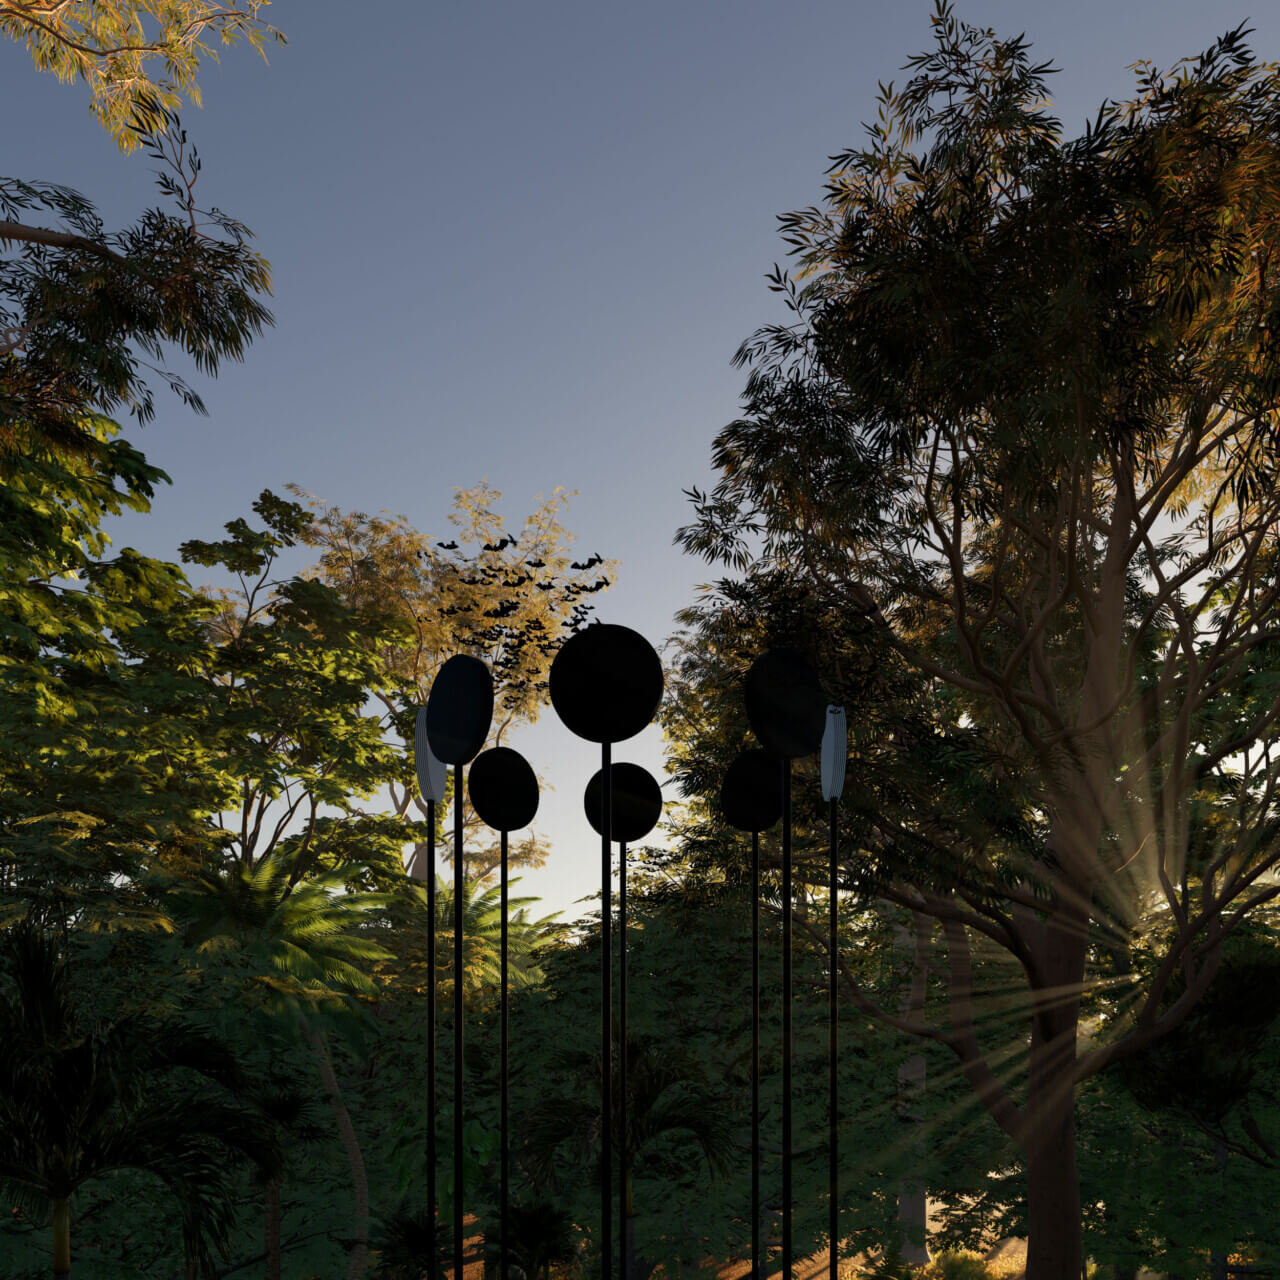 Tall posts with circular object on the top standing in A JUNGLE AT DUSK AS BATS FLY NEAR THE STRUCTURES.